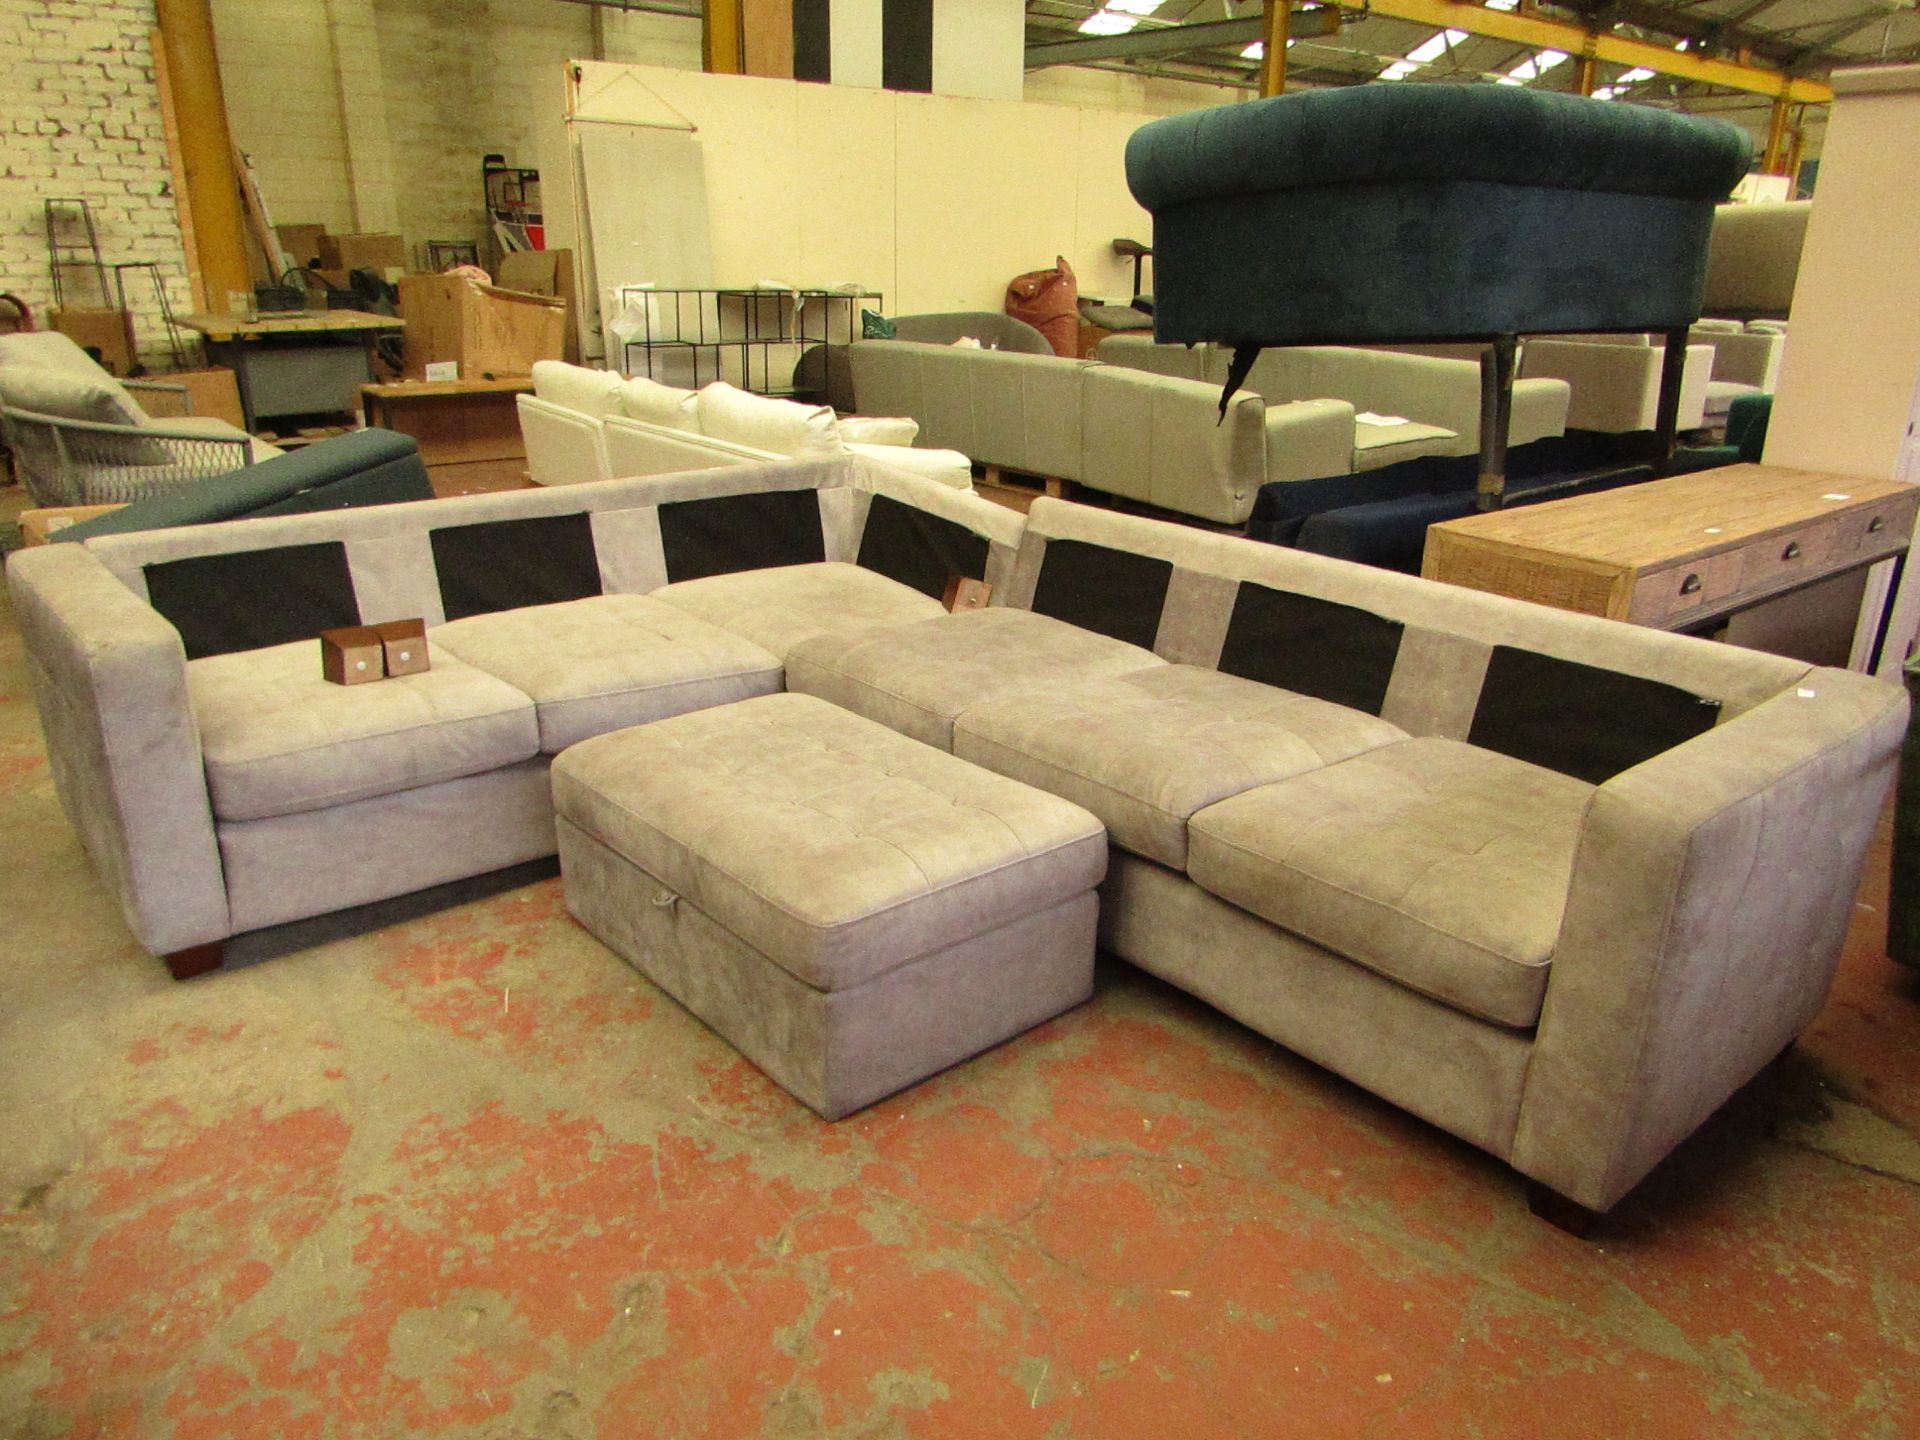 1X COSTCO 2 PIECE CORNER SOFA - ONE LEG MAY BE DAMAGED, NO BACK CUSHIONS BUT OTHERWISE IN GOOD